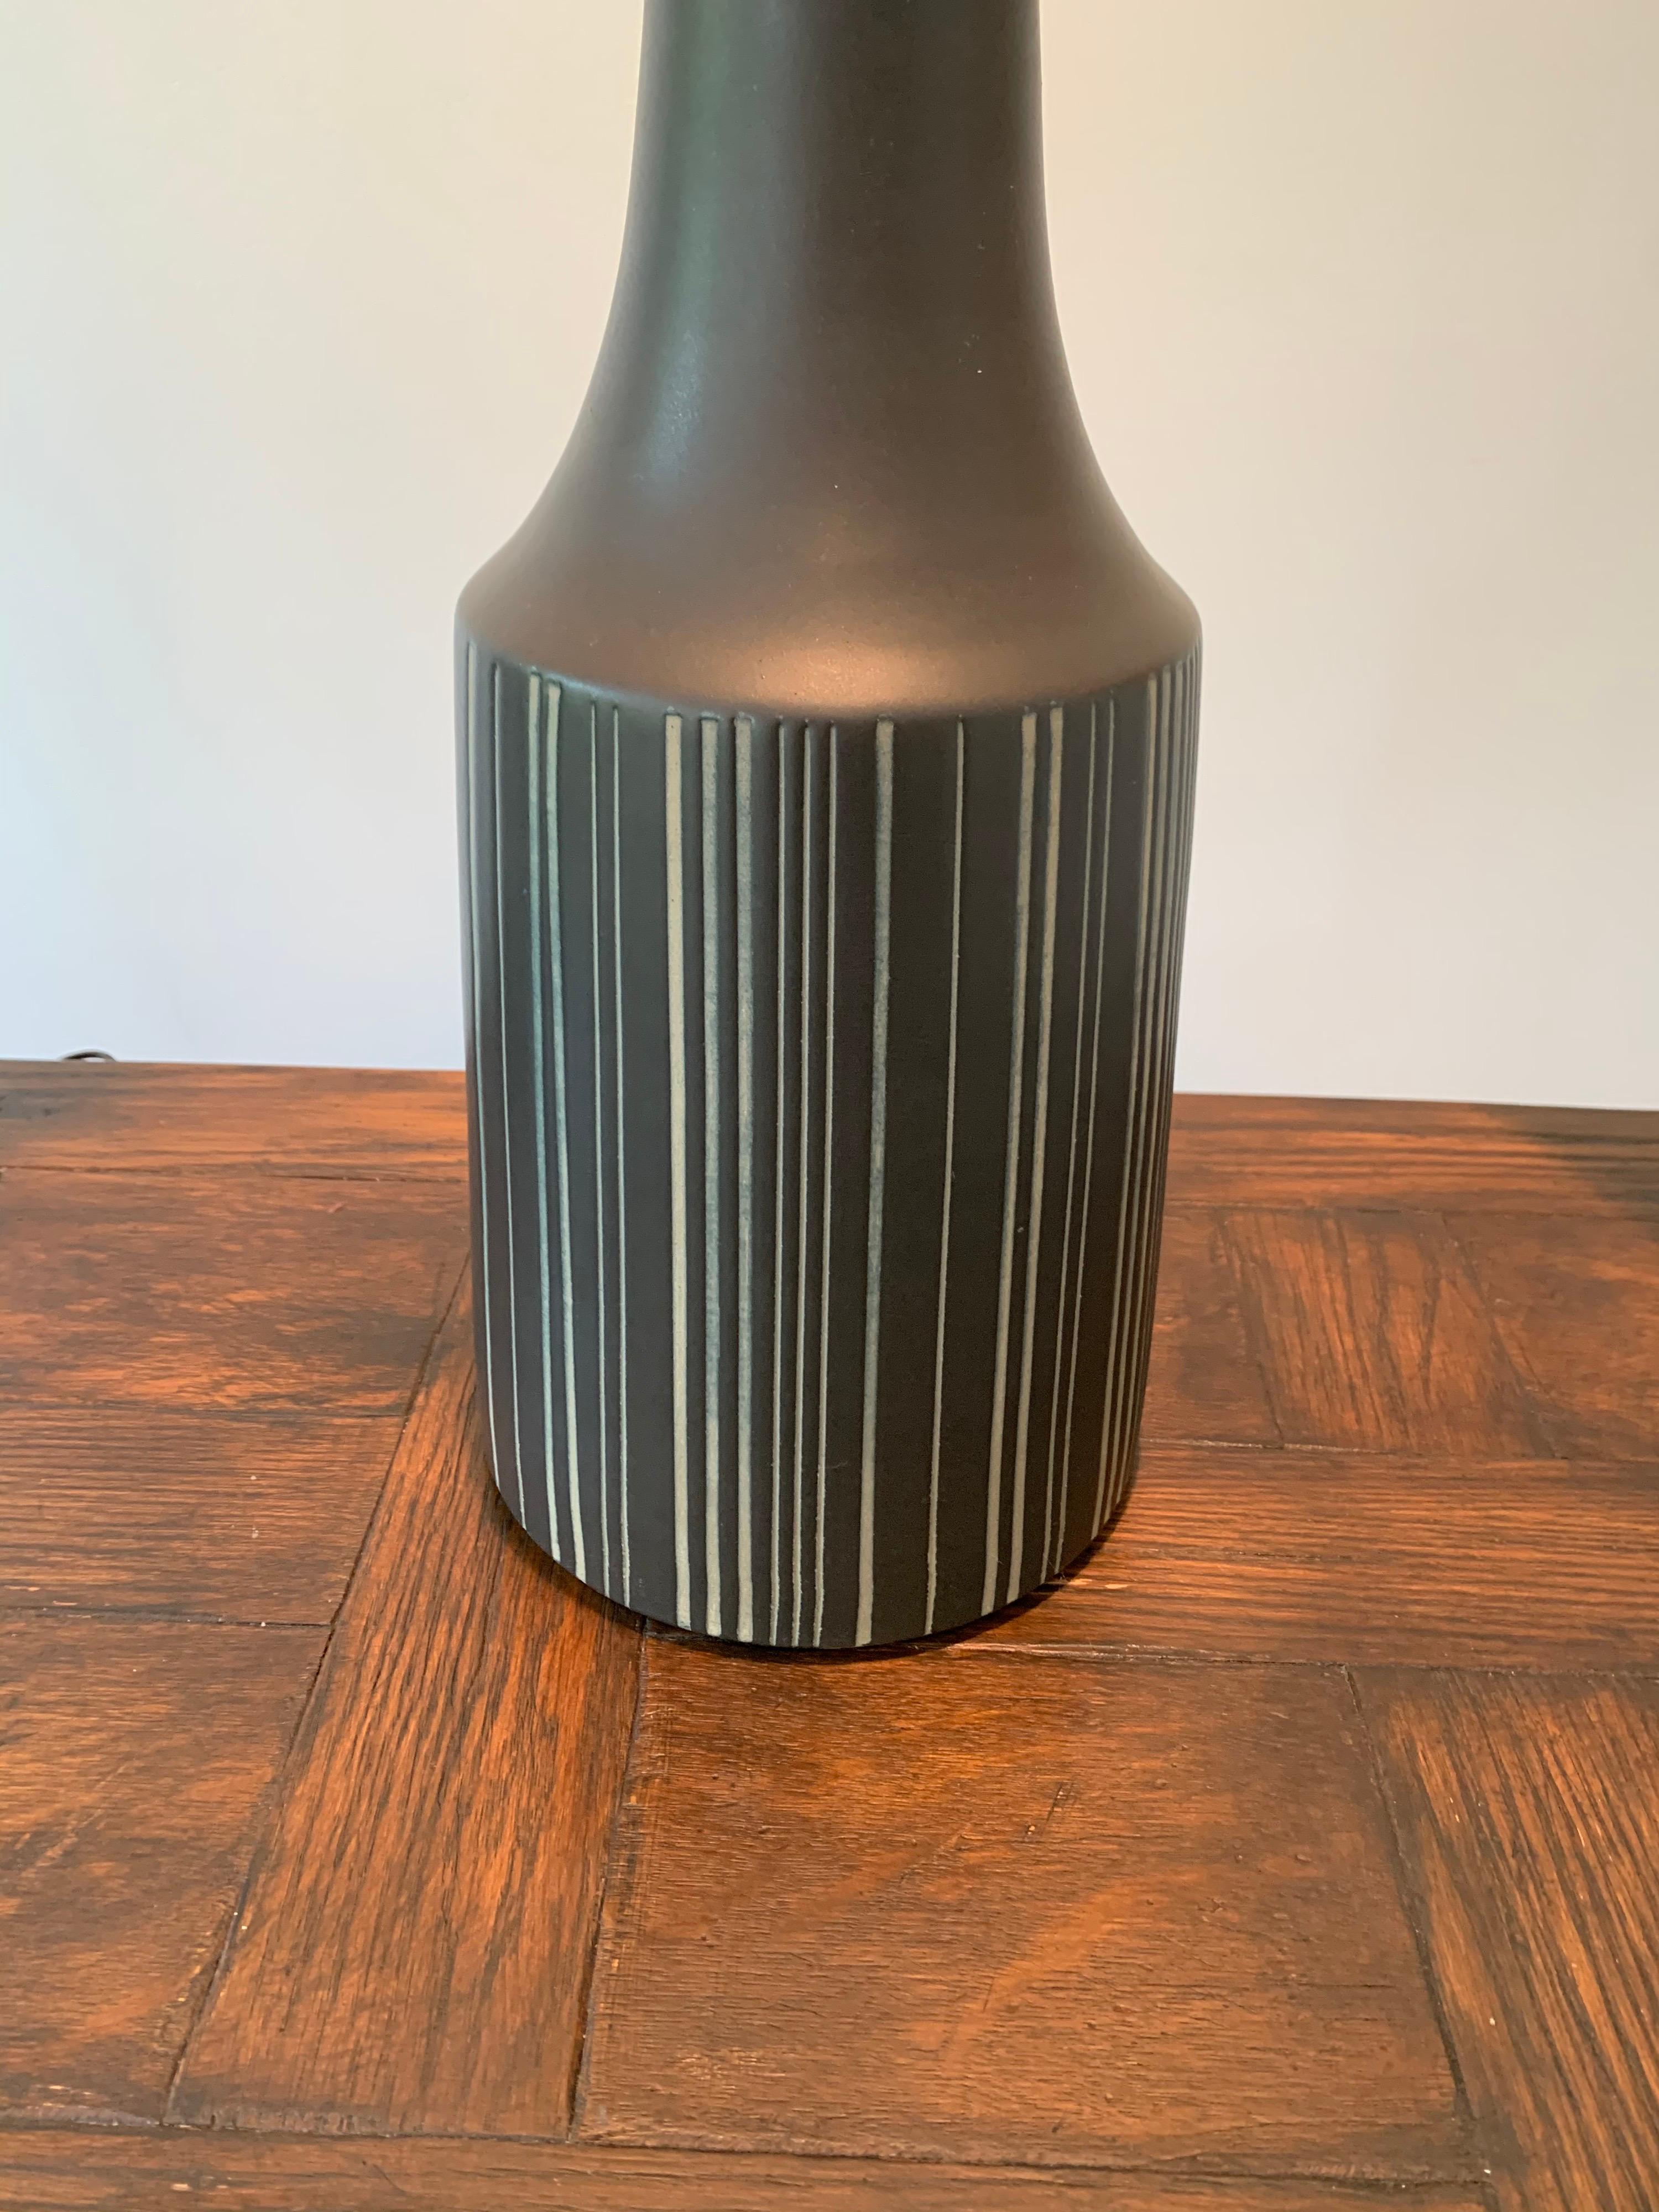 Pair of black sgraffito table lamps with walnut necks and finials. Slipcast, dipped in glaze, then hand painted with vertical lines. Signed and still have original labels.
Measures: Height to top of shade 36.5”.